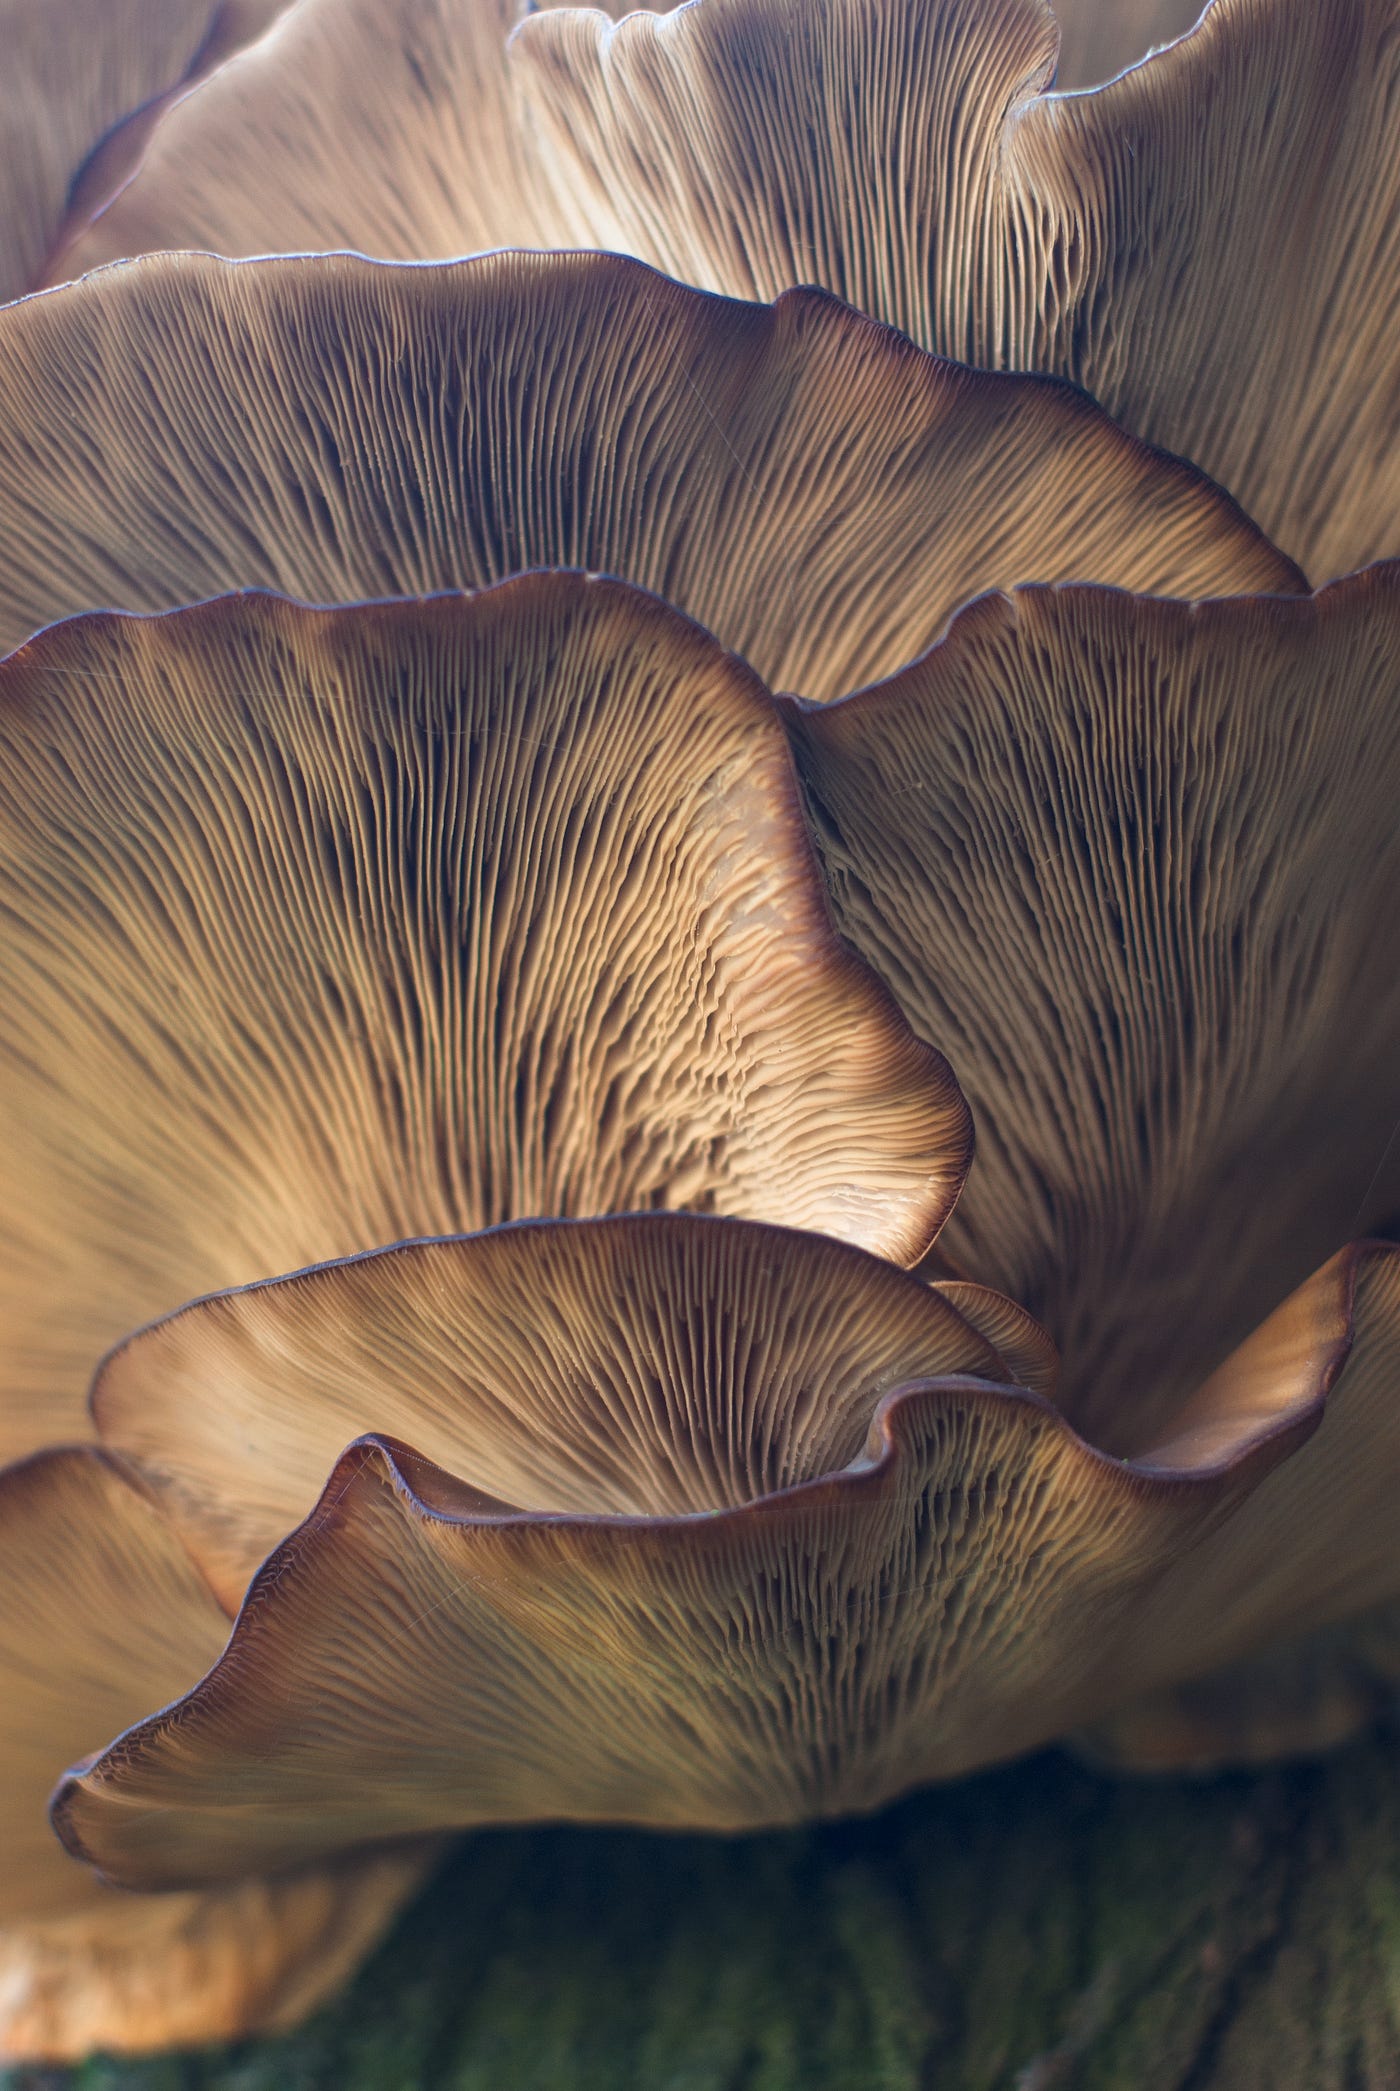 Mushroom leather just got one step closer to the mainstream